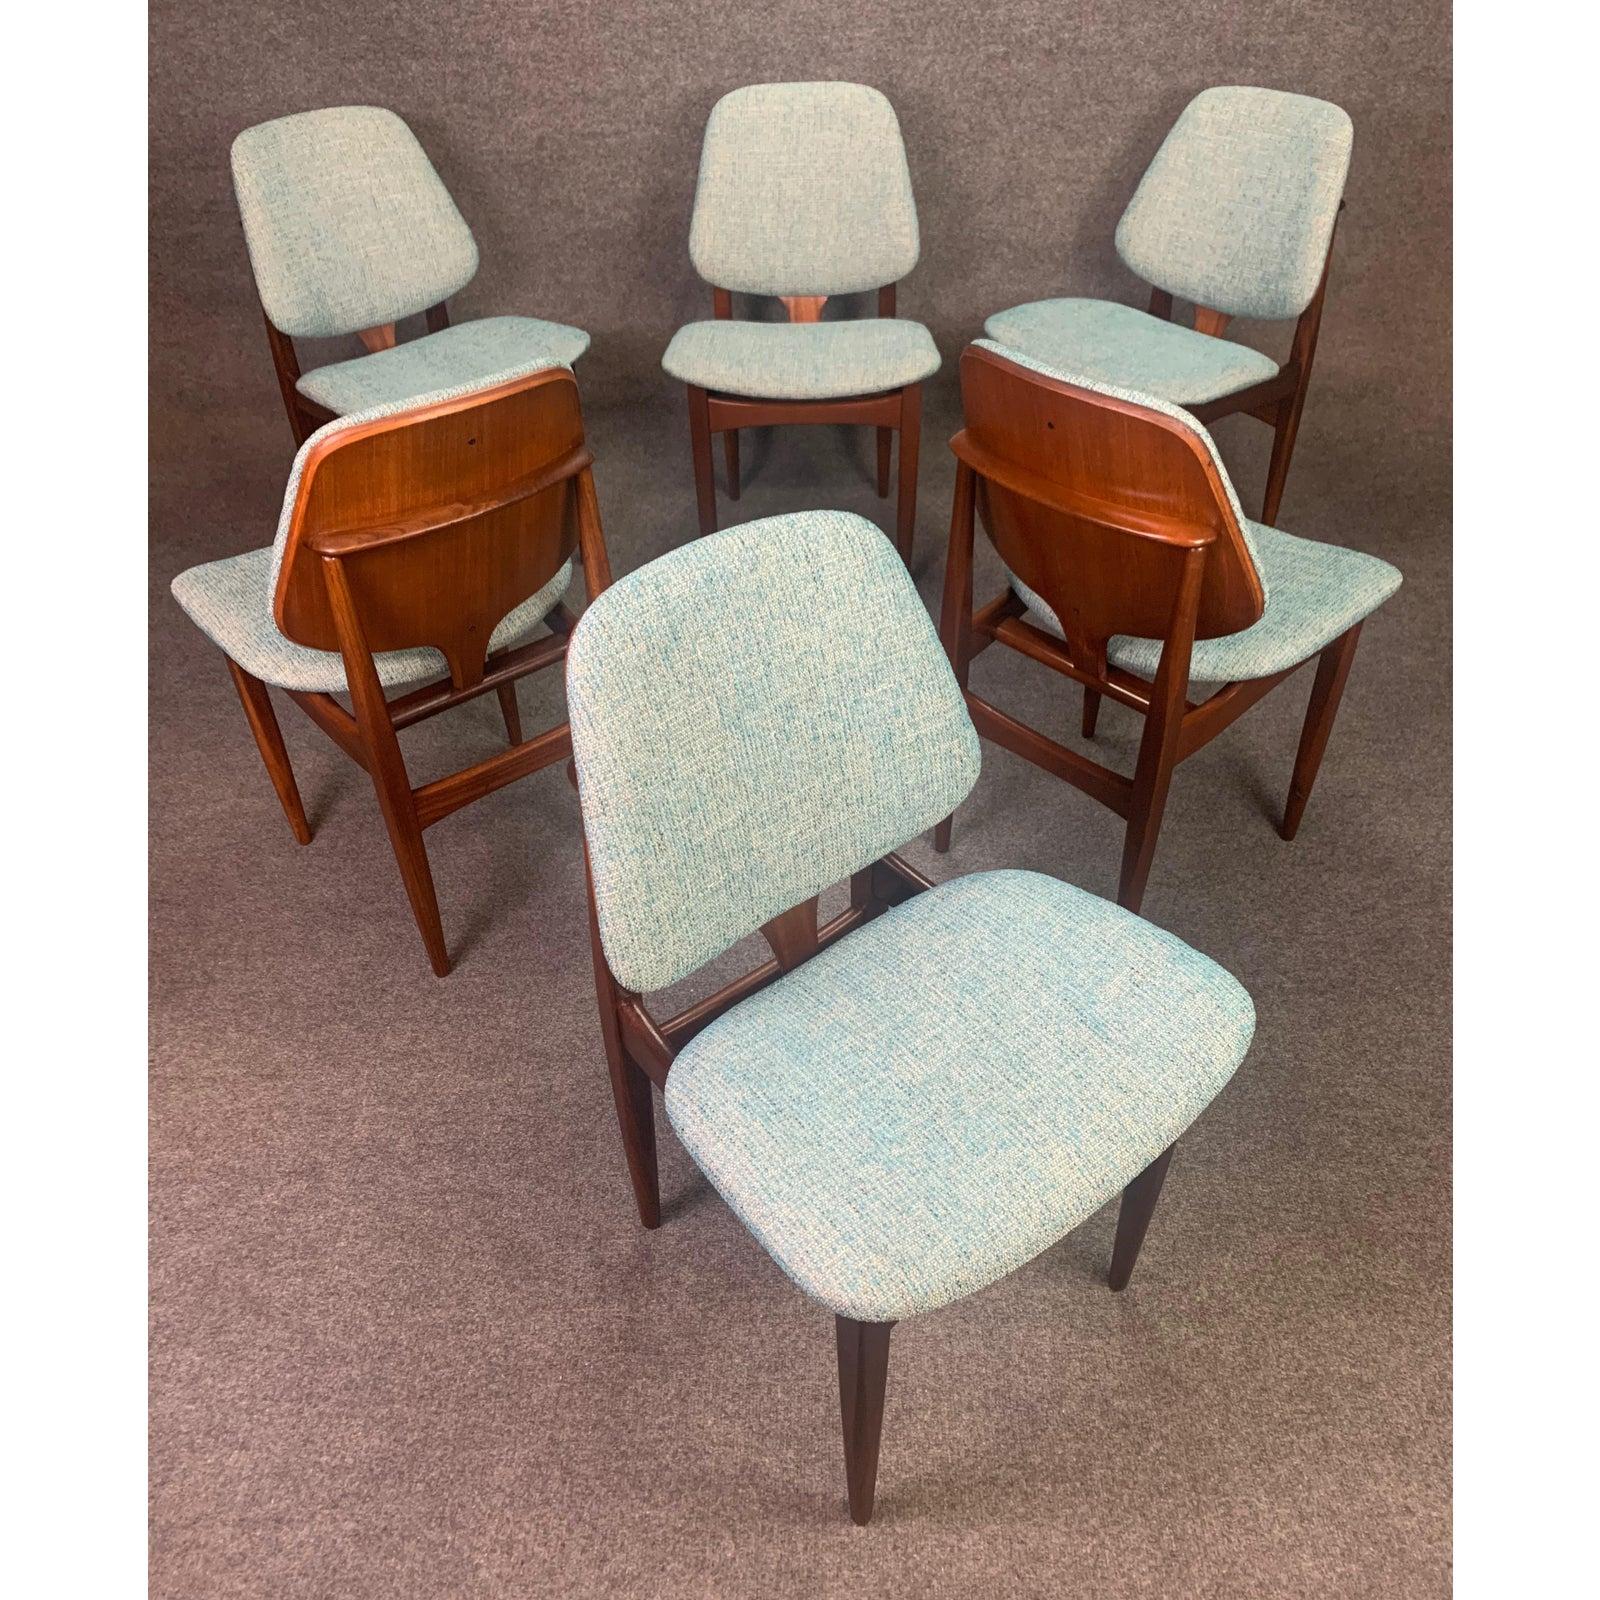 Here is a beautiful set of six British MCM dining chairs manufactured by Elliotts of Newbury in England in the 1960s.
This lovely set of comfortable chairs, recently imported from UK to California before their restoration, features a sculptural